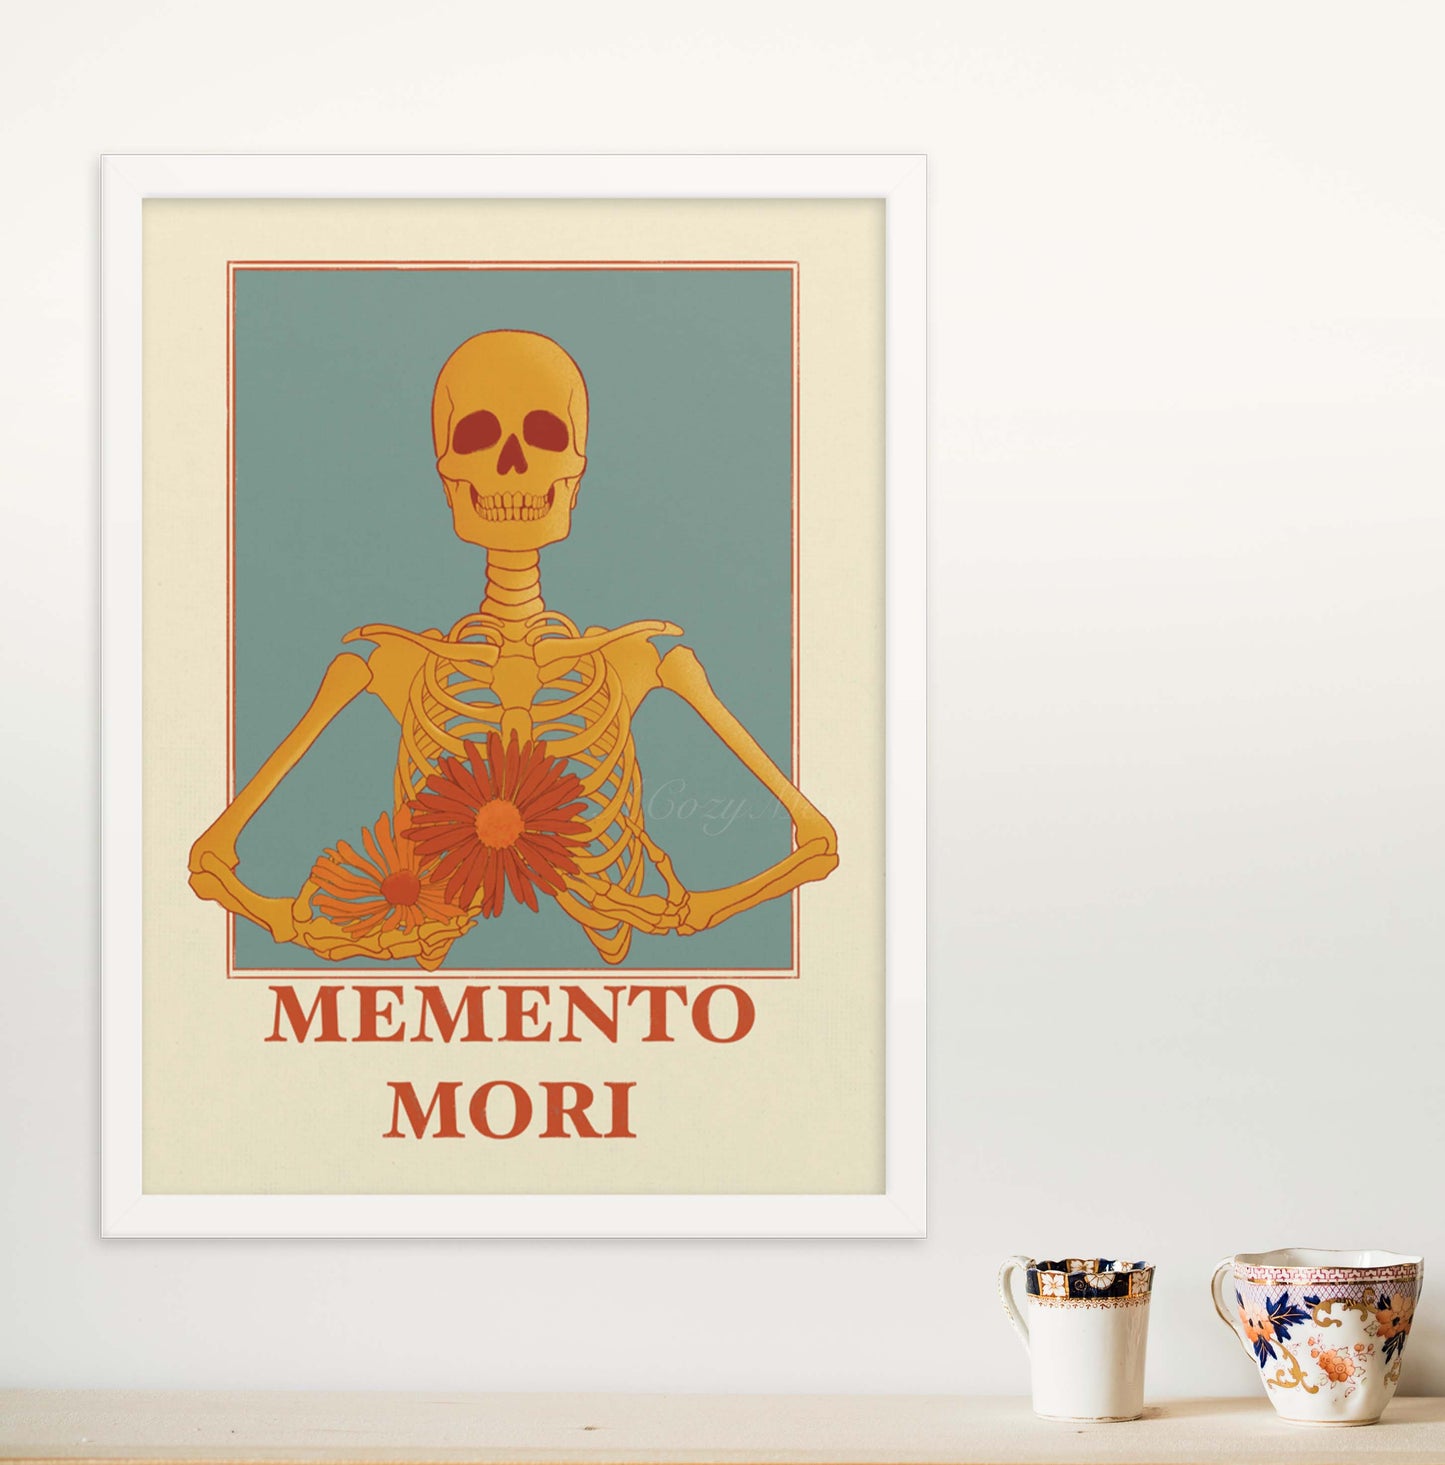 A memento mori art piece in beige blue, yellow & orange hues, featuring a skeleton carrying colorful flowers in white frame